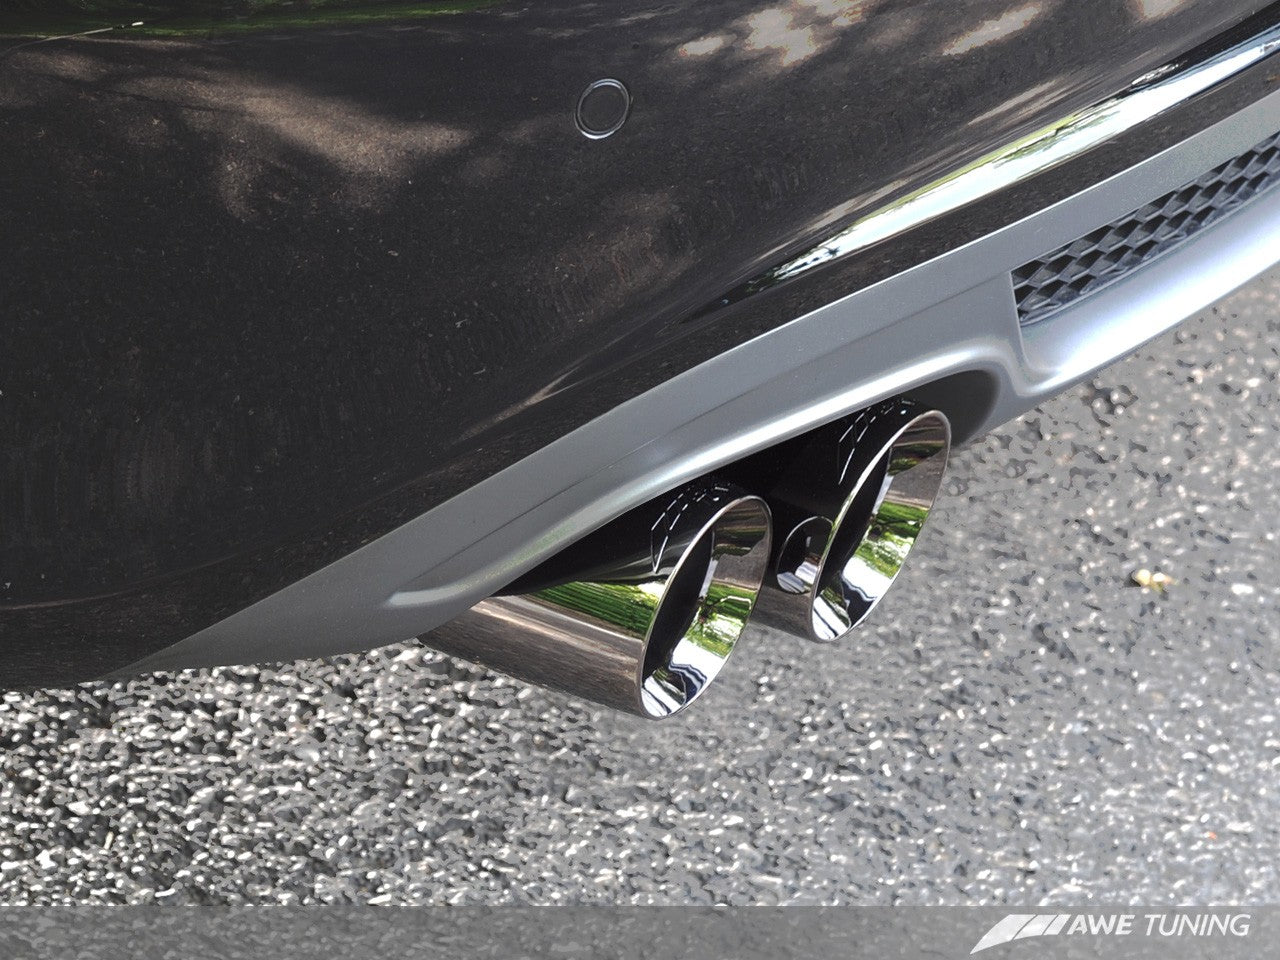 AWE Touring Edition Exhaust for B8 A4 2.0T - Quad Tip, Polished Silver Tips